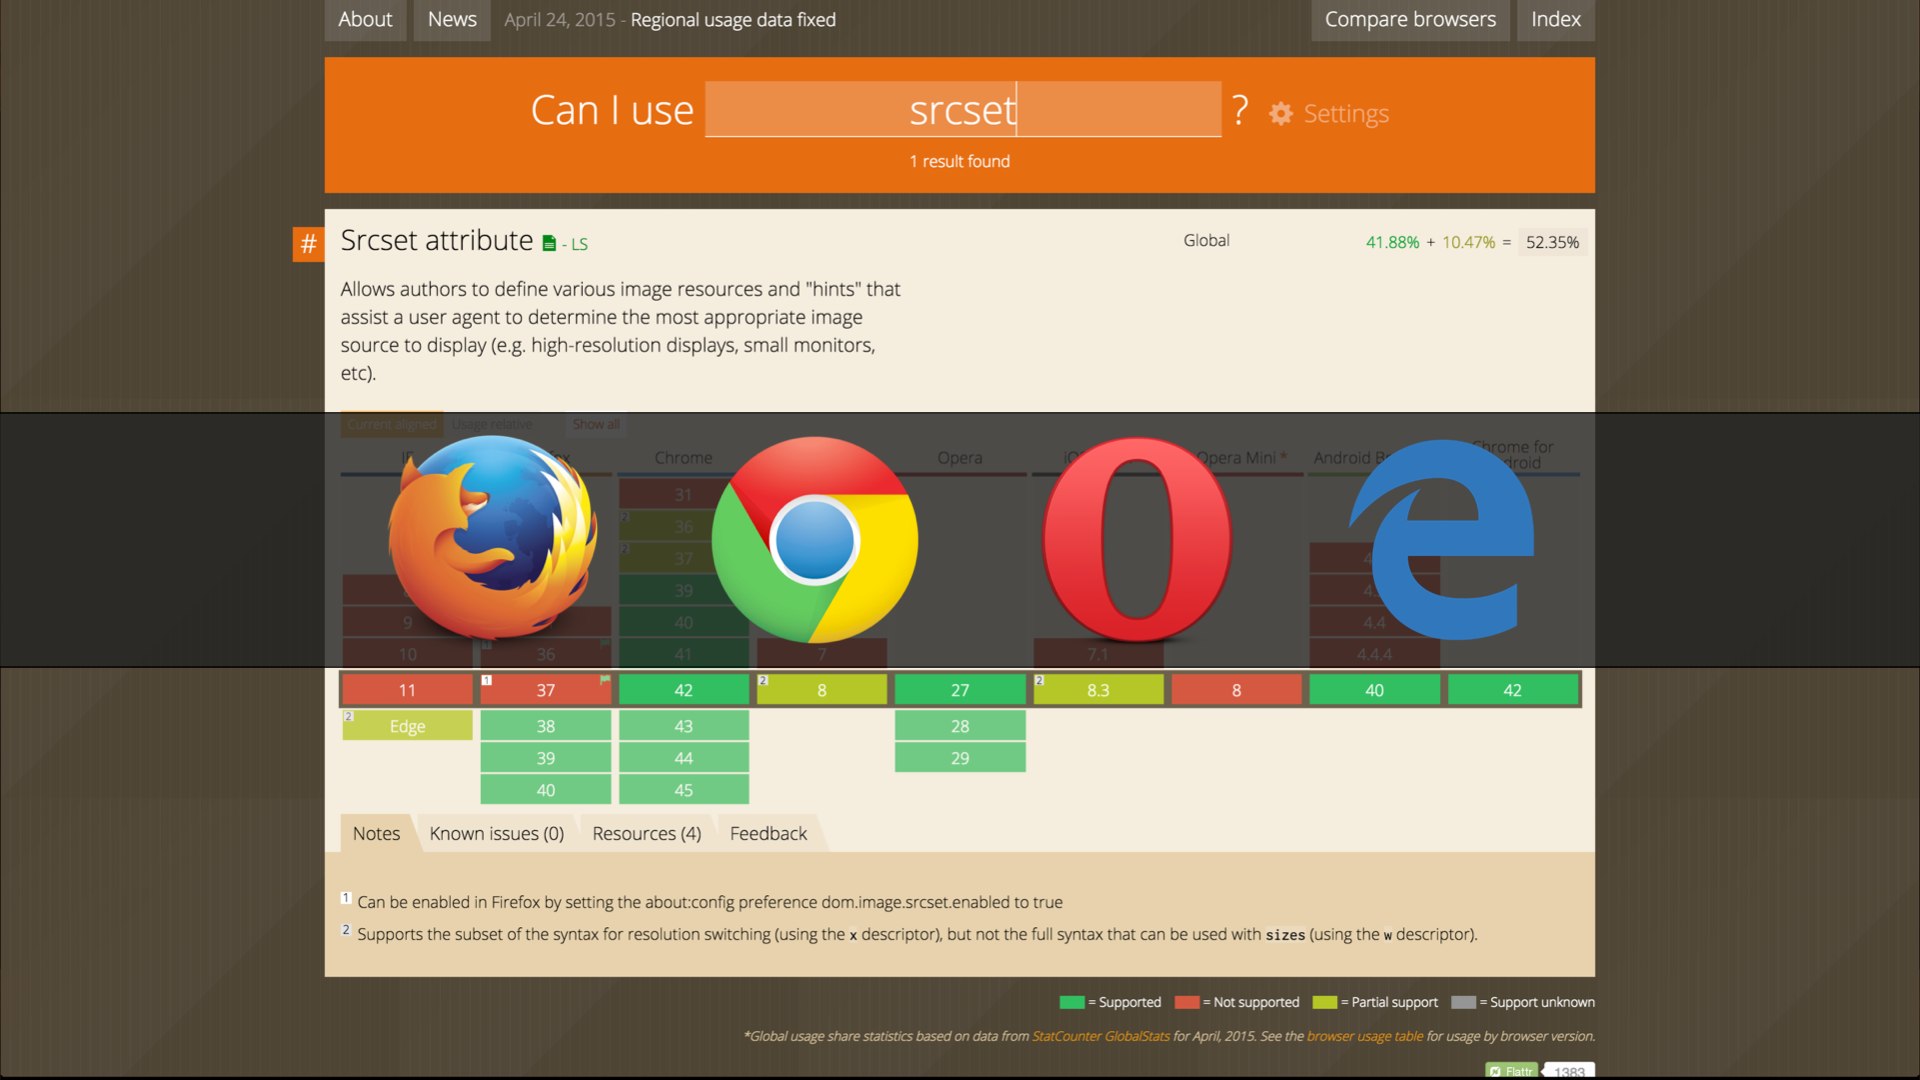 Screenshot of the caniuse.com page for srcset, with the icons for Chrome, Opera, Firefox, and MS Edge browsers superimposed over it.